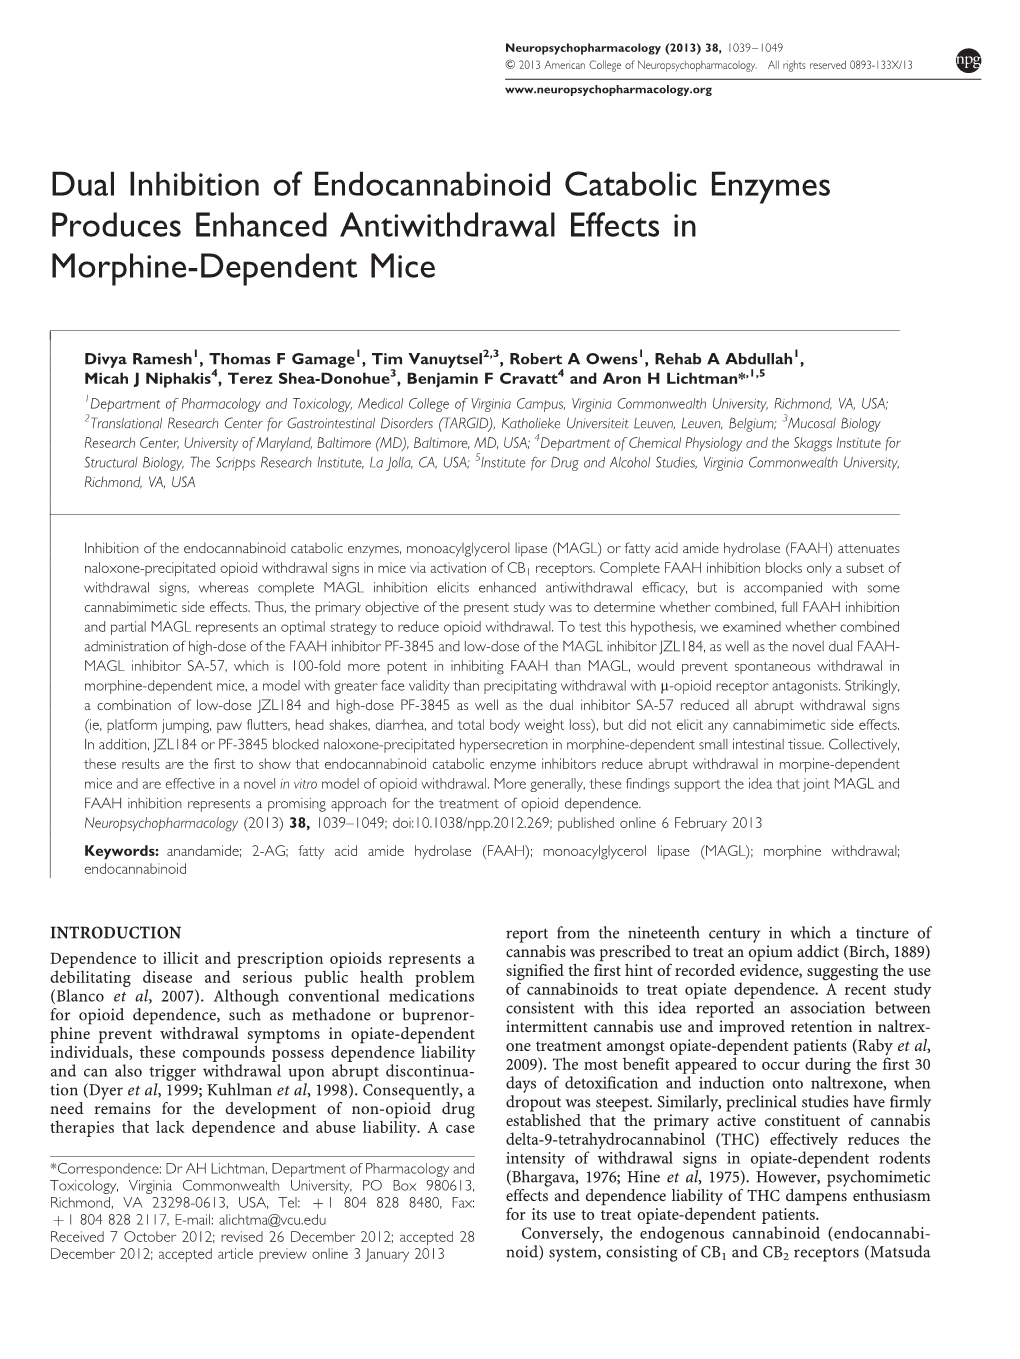 Dual Inhibition of Endocannabinoid Catabolic Enzymes Produces Enhanced Antiwithdrawal Effects in Morphine-Dependent Mice